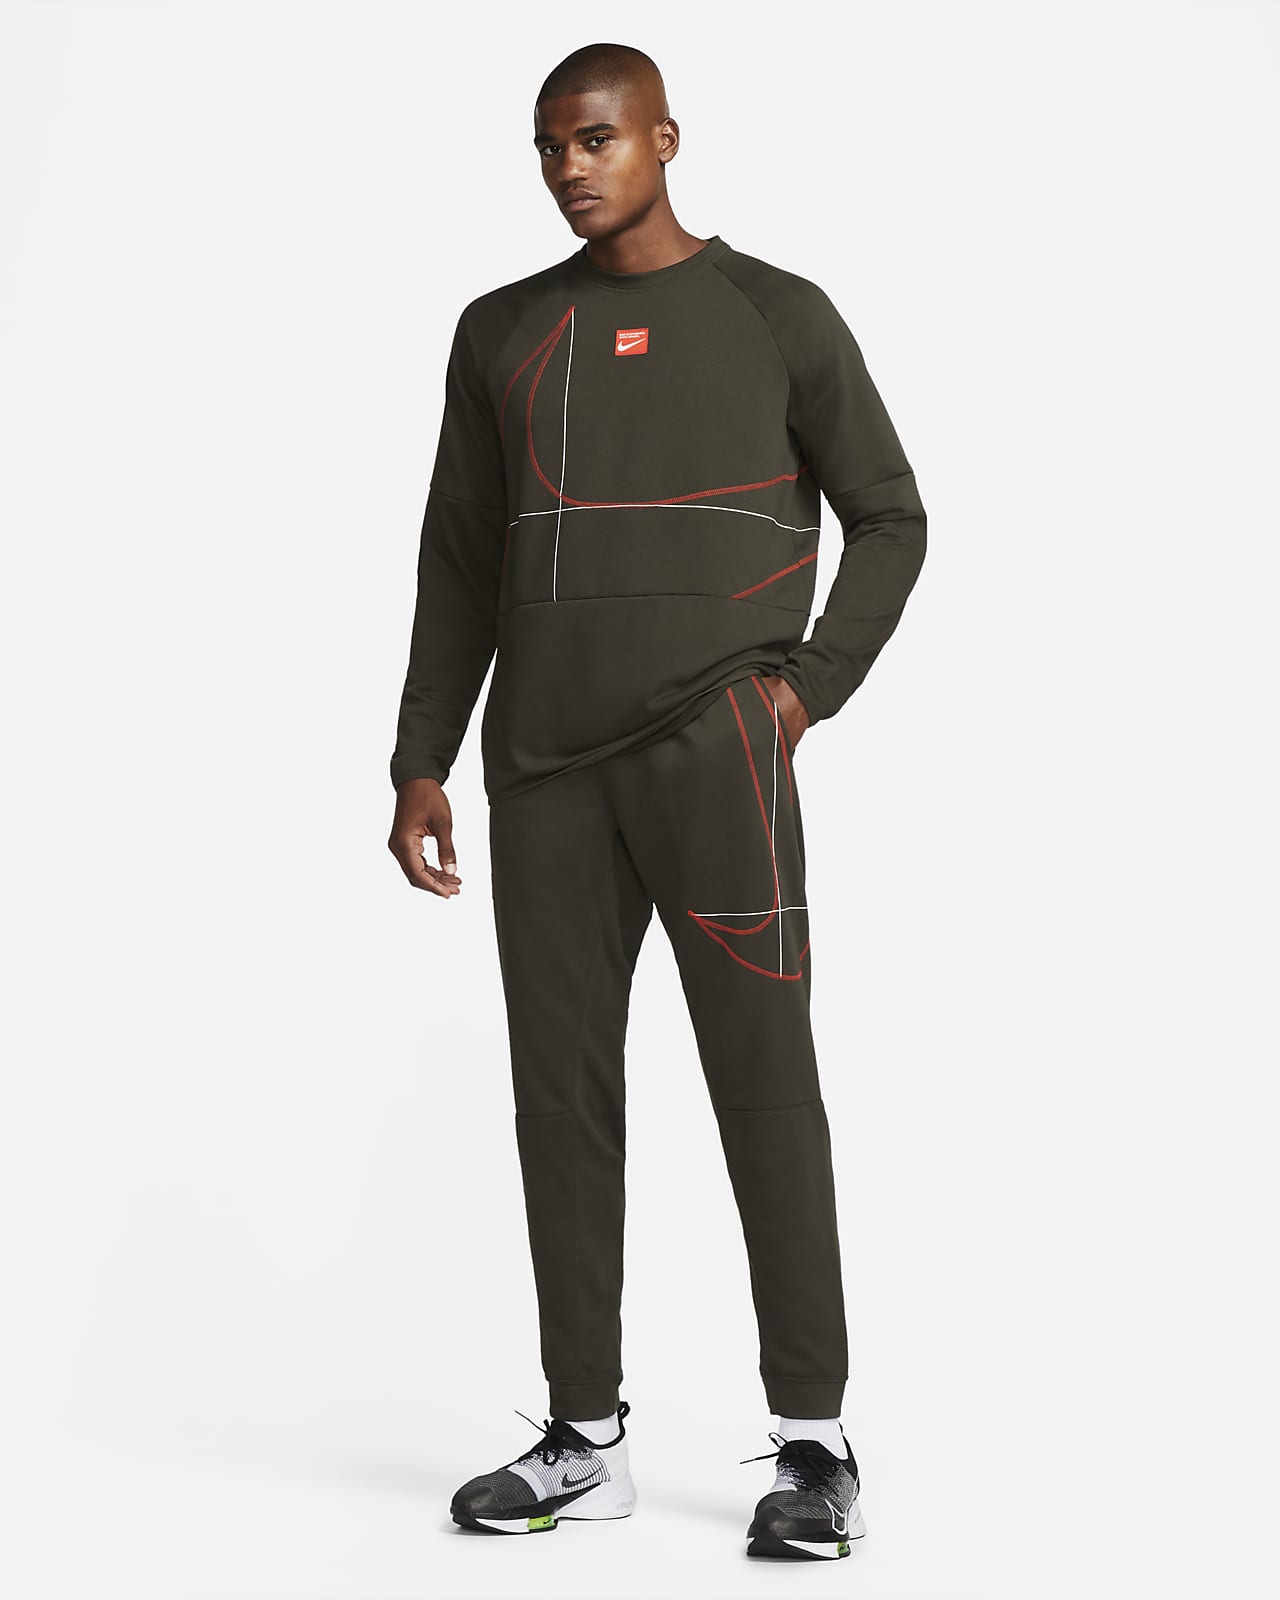 Discover the Power of Style and Comfort with the Nike Tech Fleece